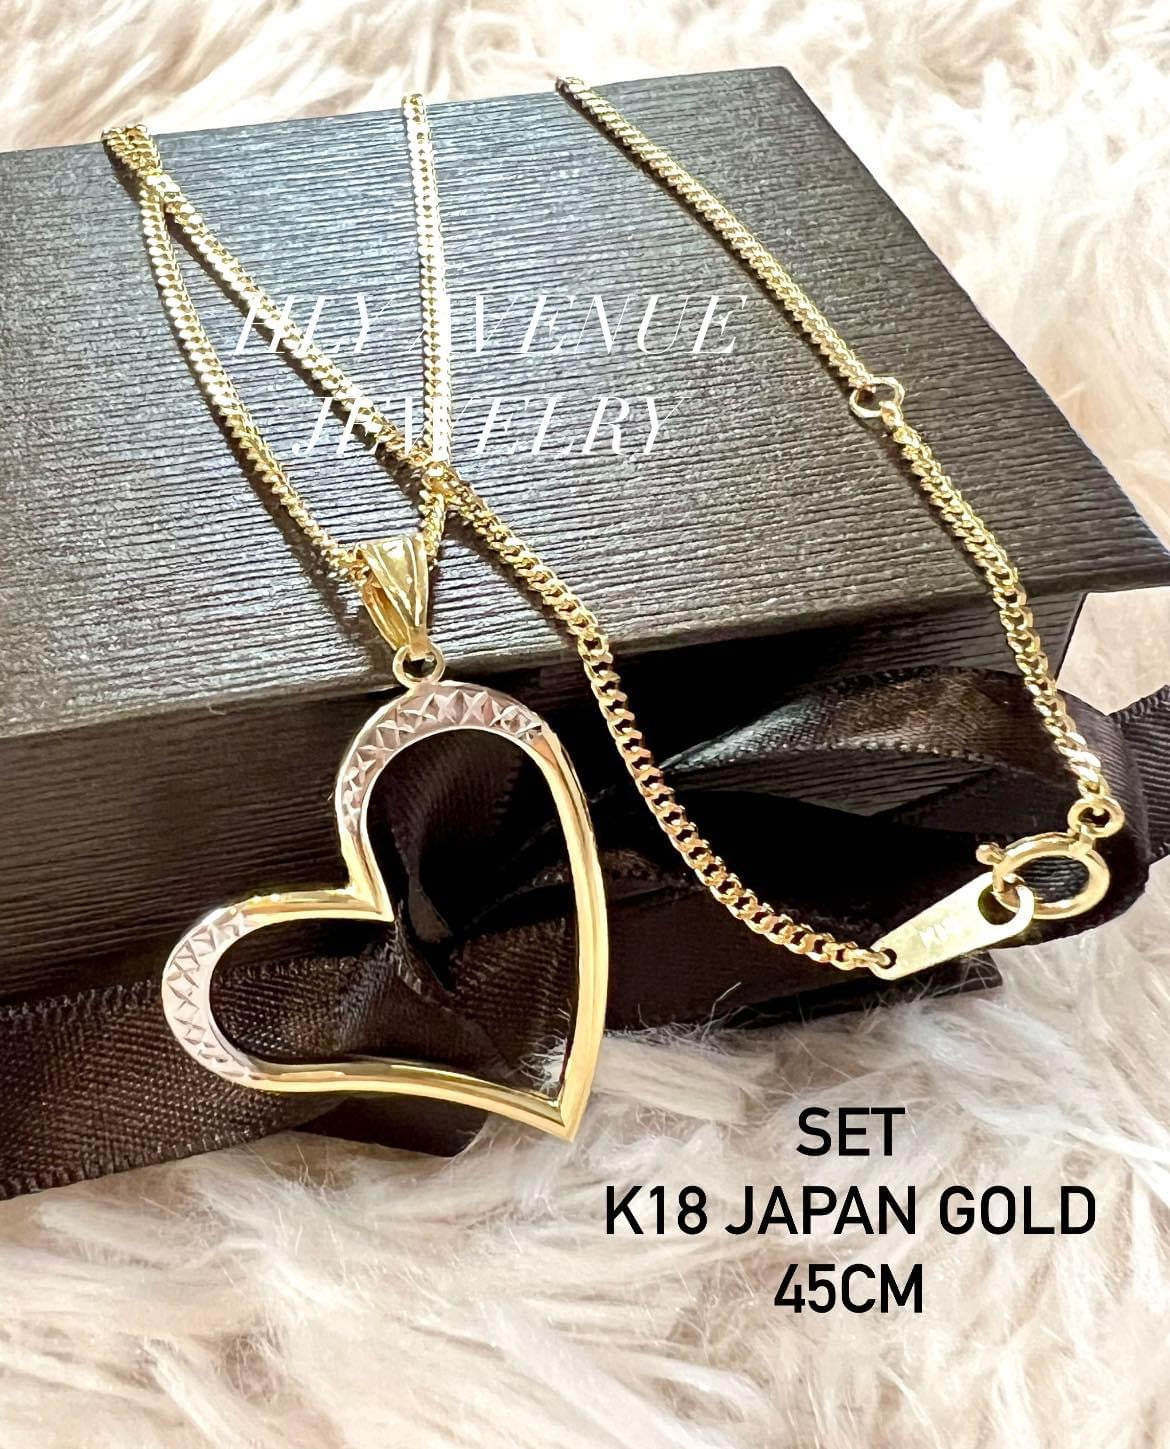 K18 Japan gold 8cut / 8 triple necklace with pendant + free raffle #76 -  YouTube